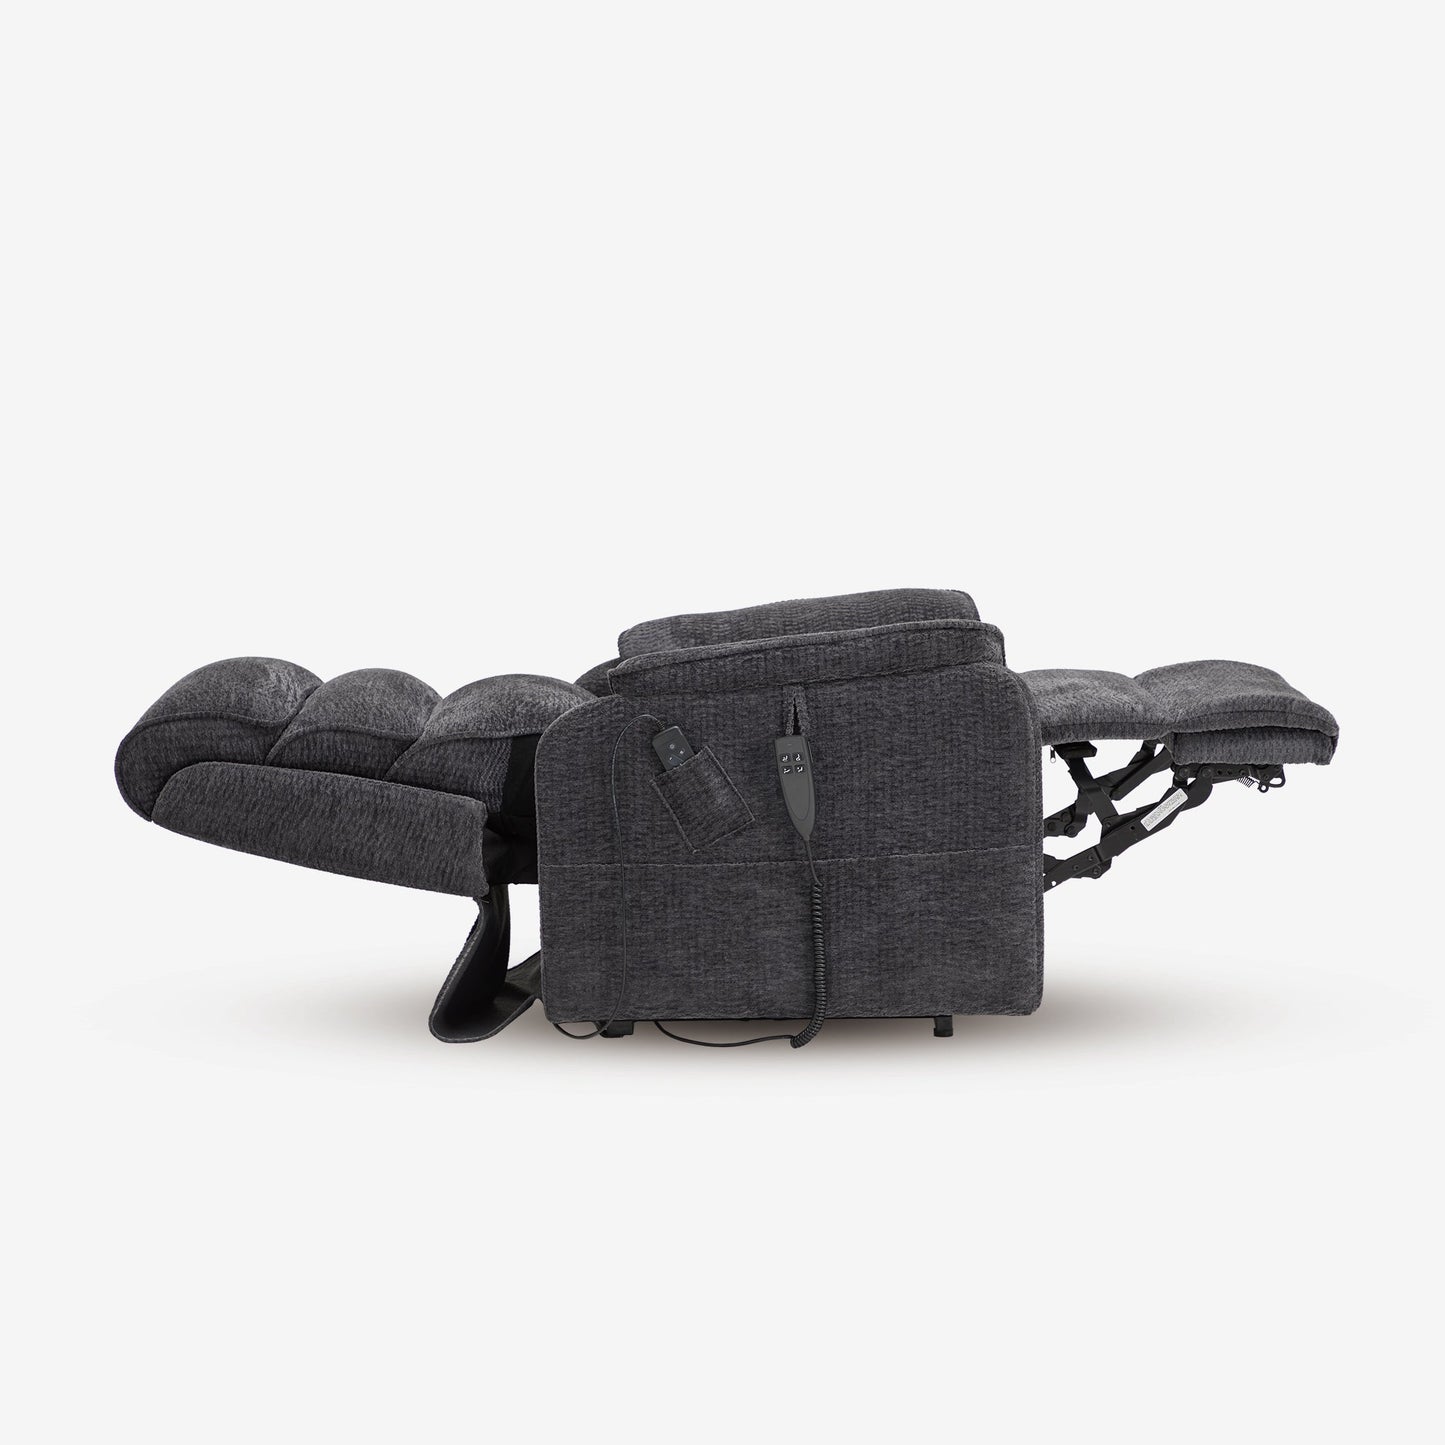 Sleeping Chairs For The Elderly With Infinite Positions Full Lay Flat